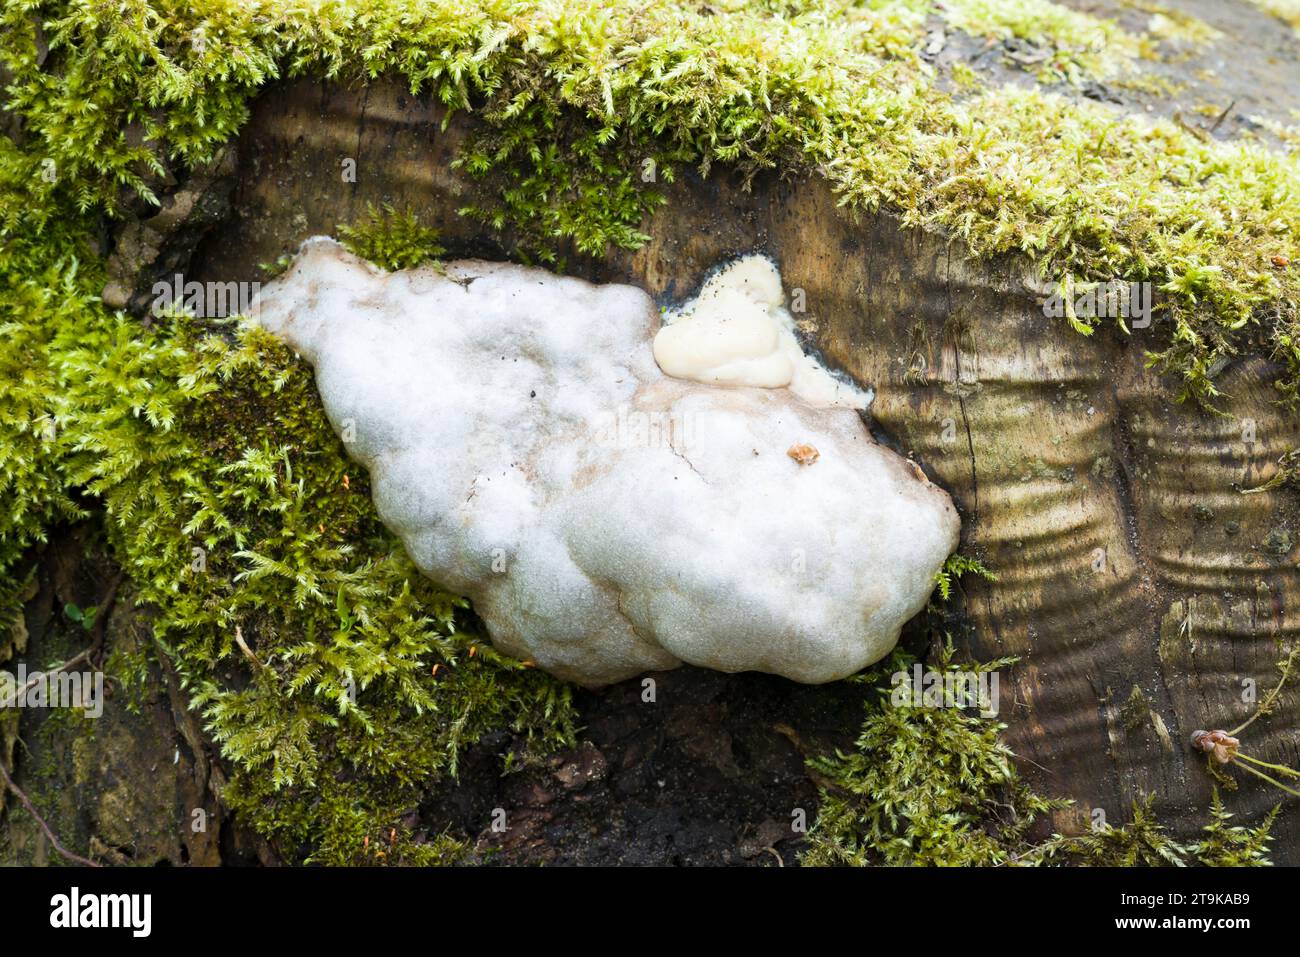 False puffball slime mould (slime mold) Enteridium lycoperdon growing on a tree stump in a UK garden in spring Stock Photo